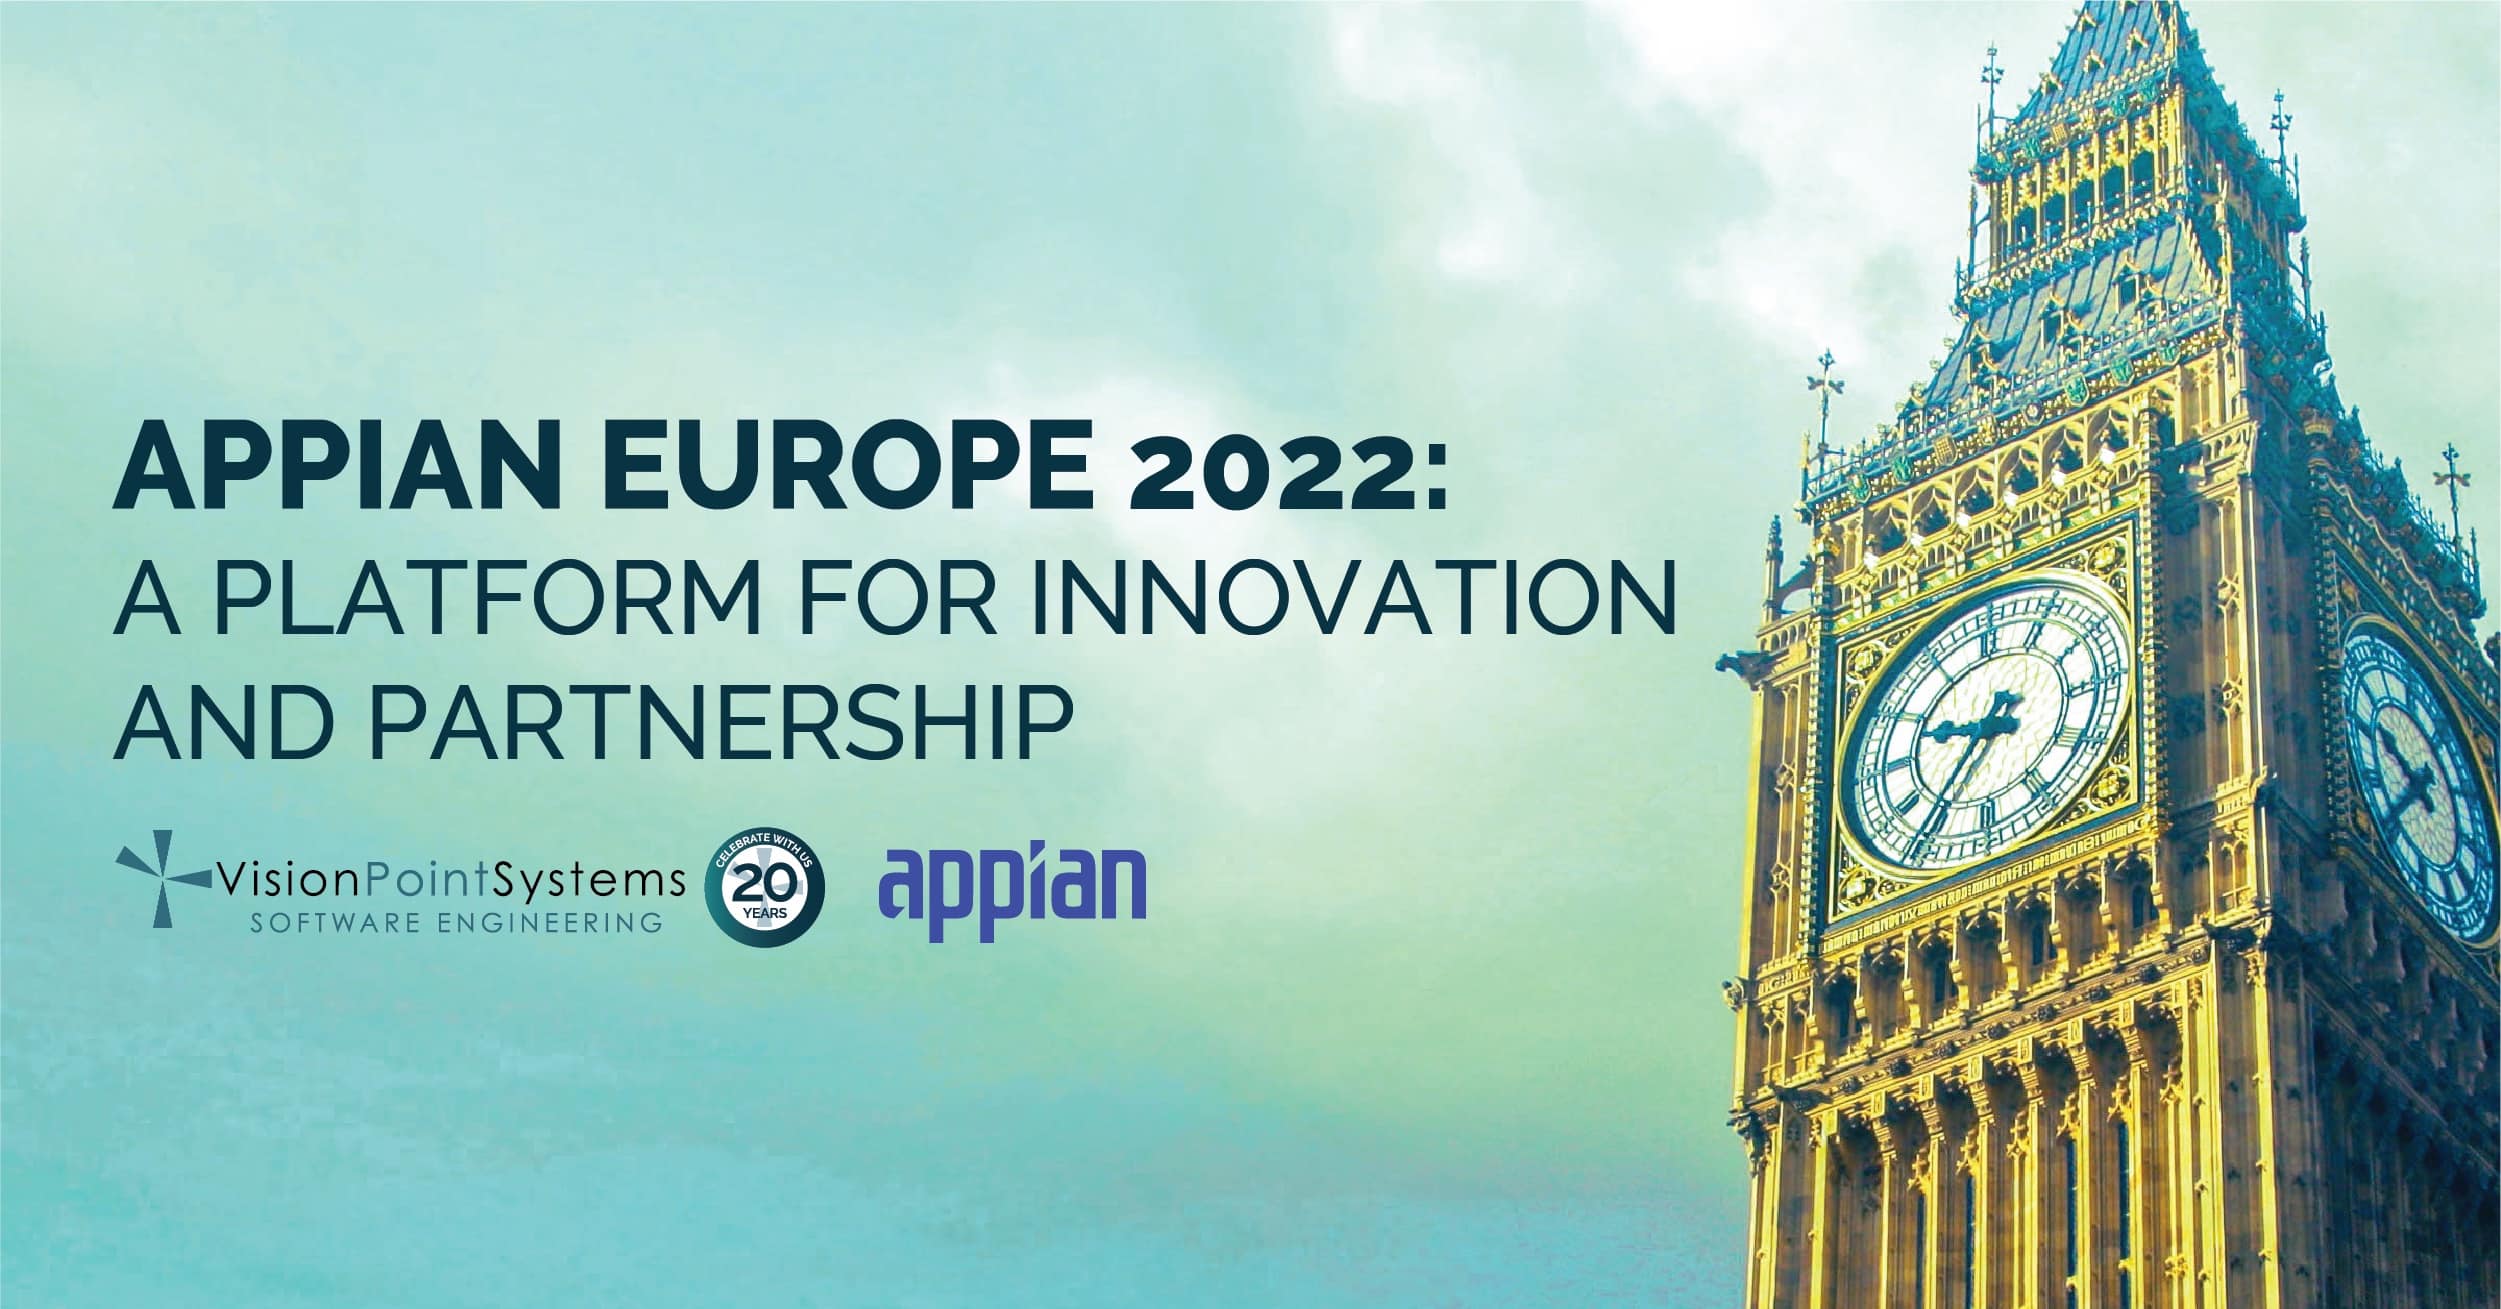 Appian Europe 2022 A Platform for Innovation and Partnership